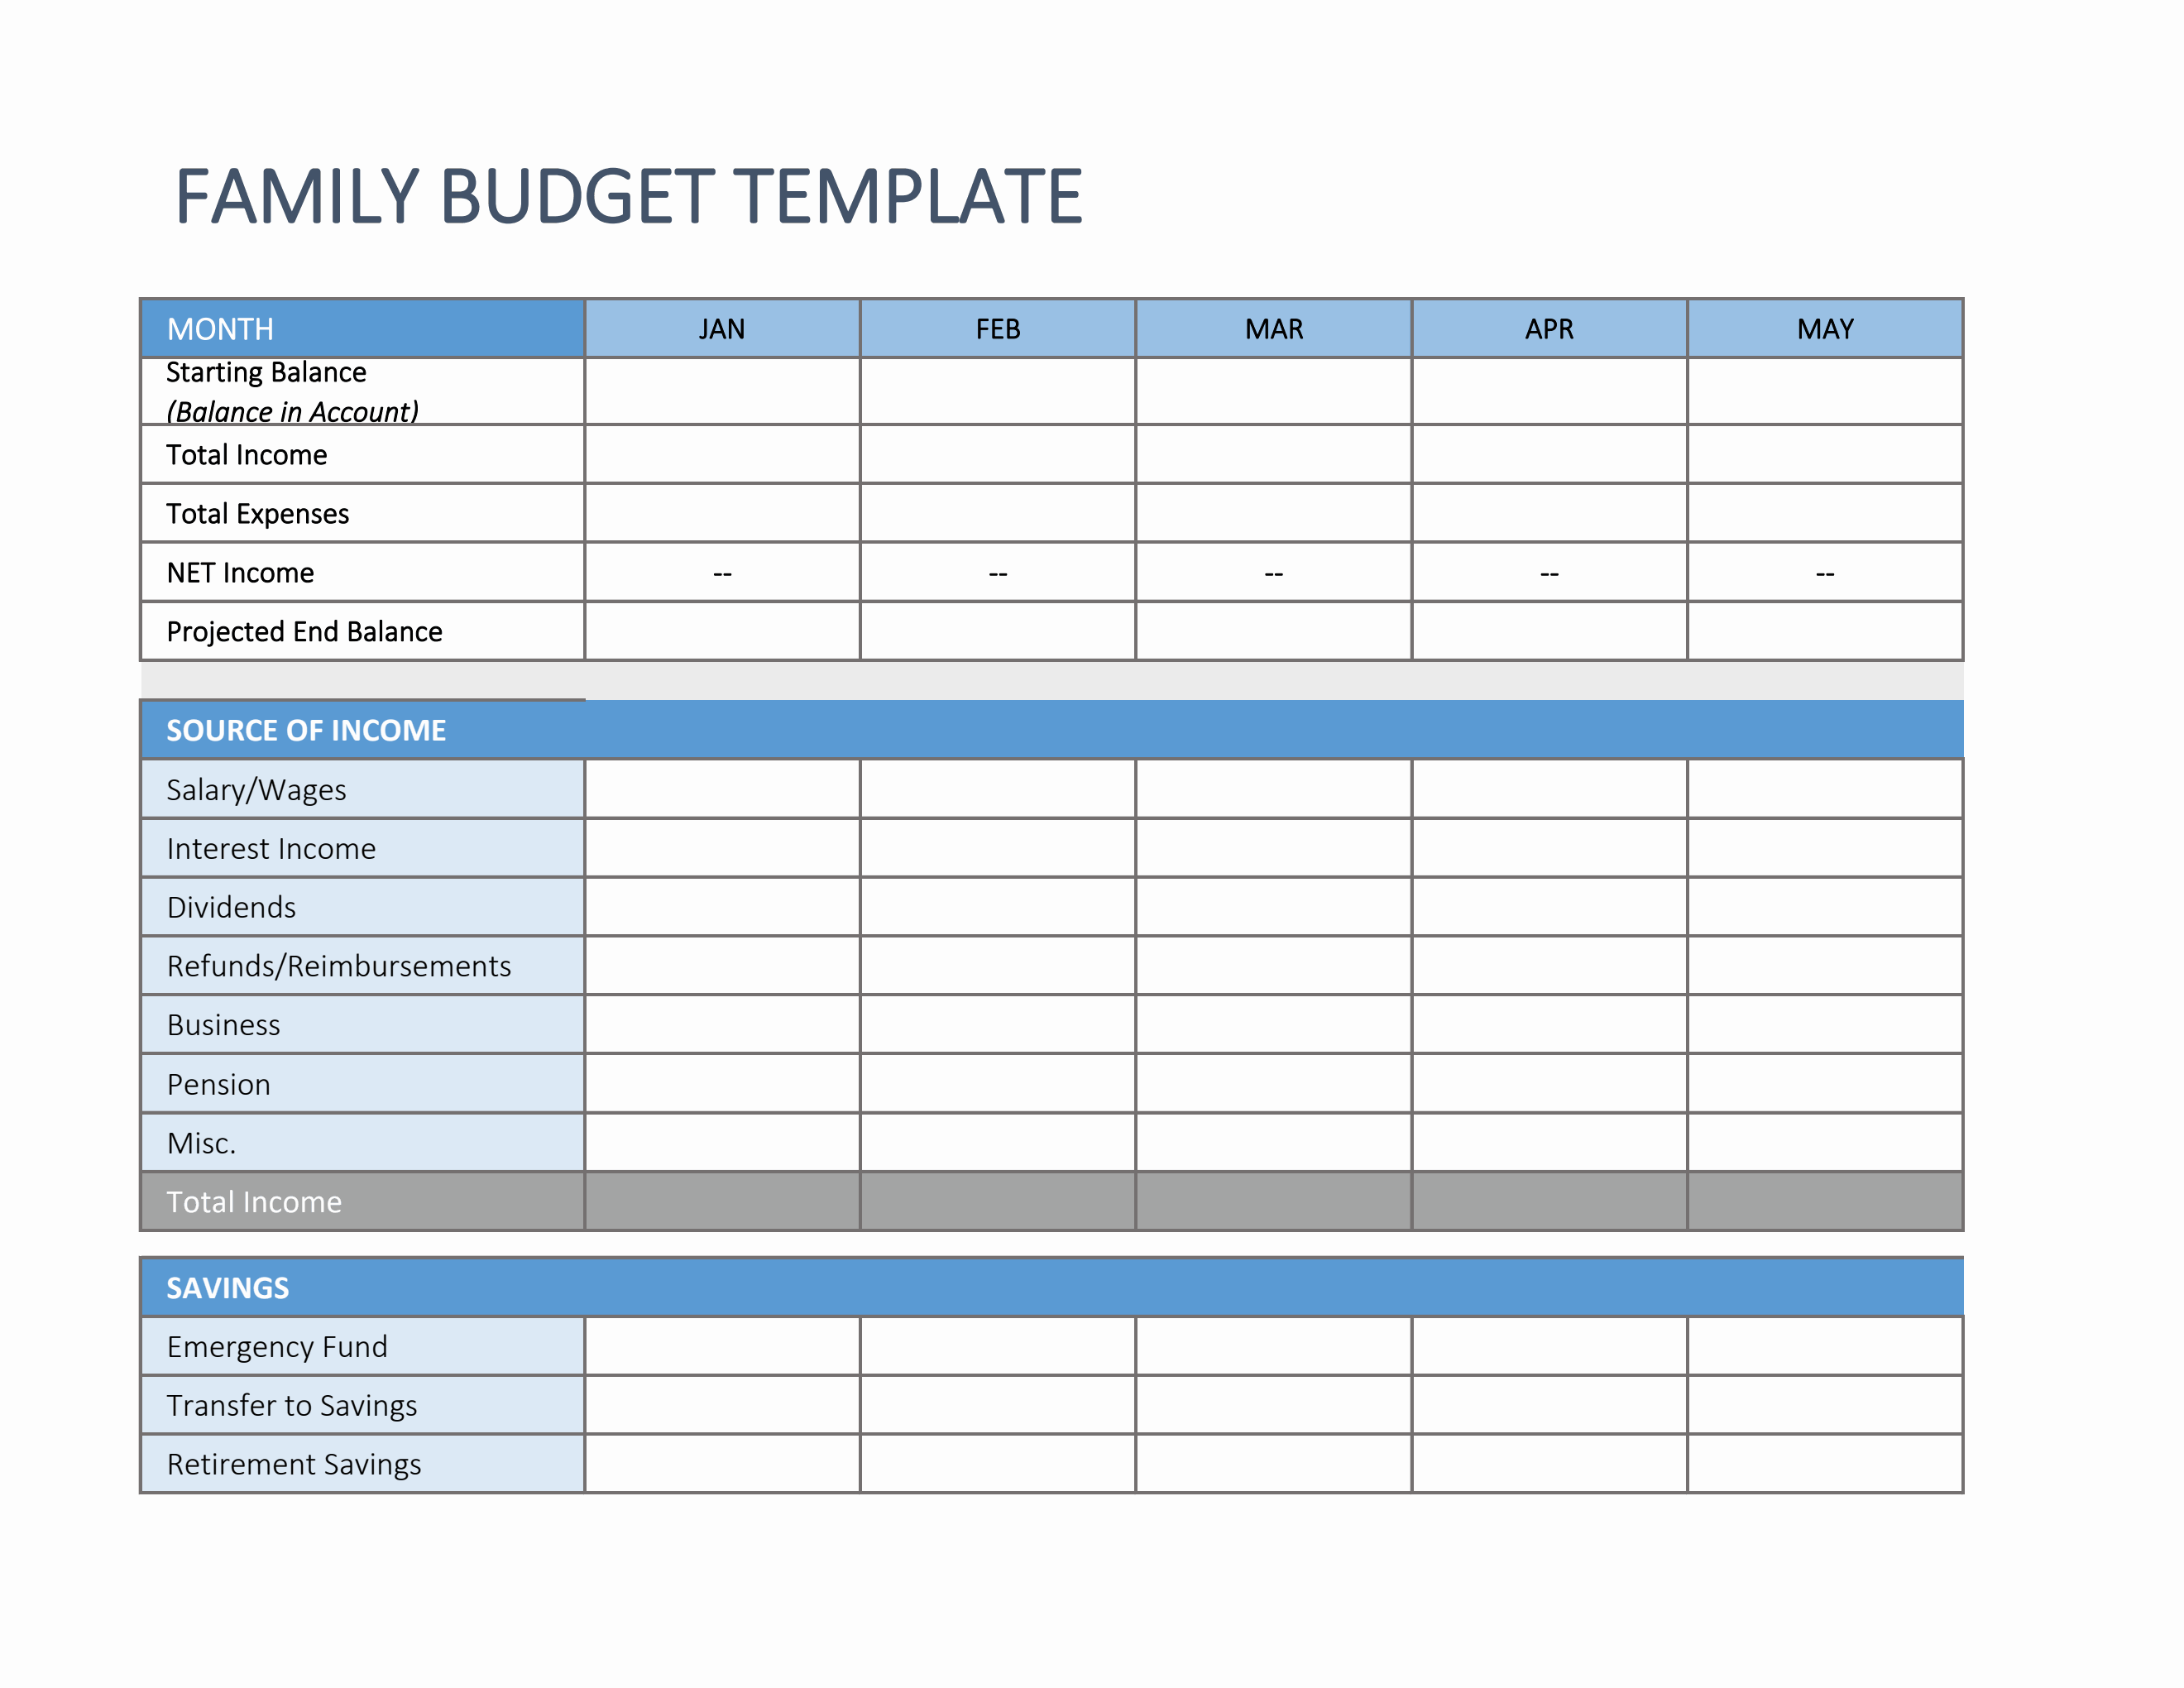 download sample of monthly household budget spreadsheet